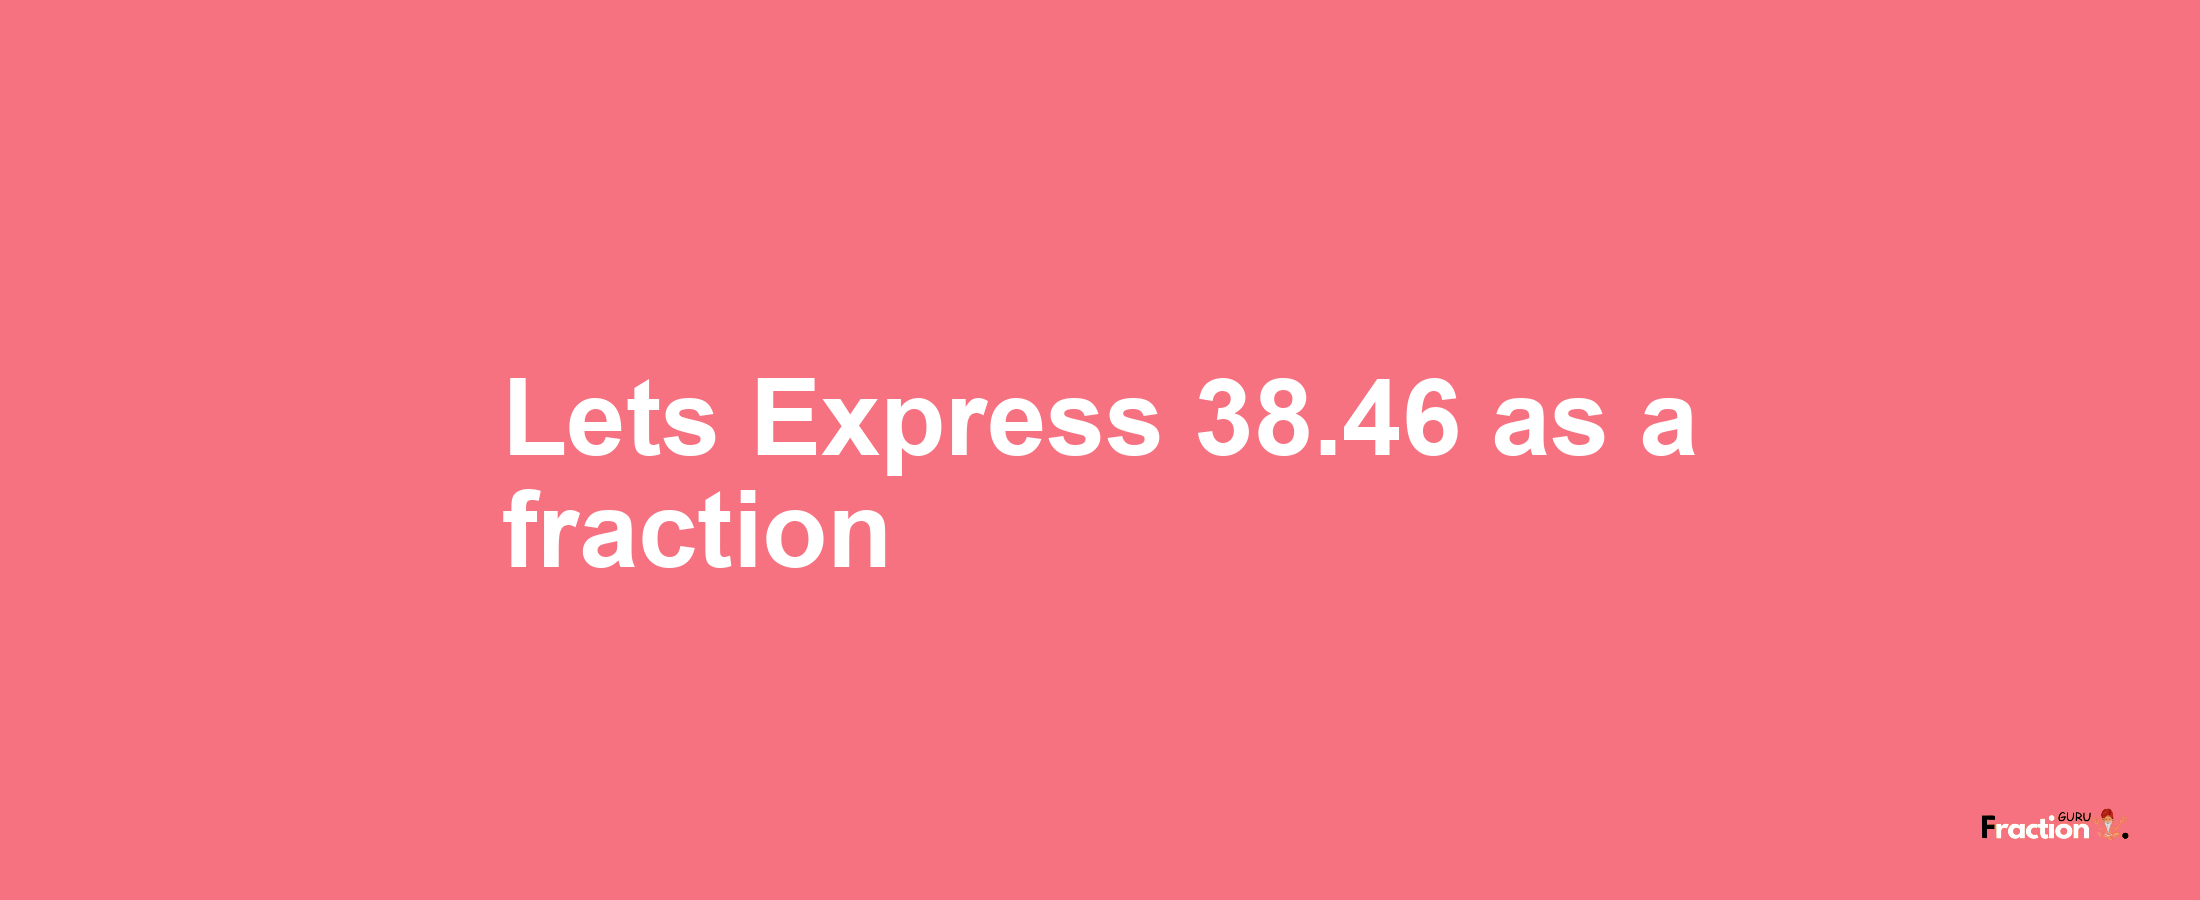 Lets Express 38.46 as afraction